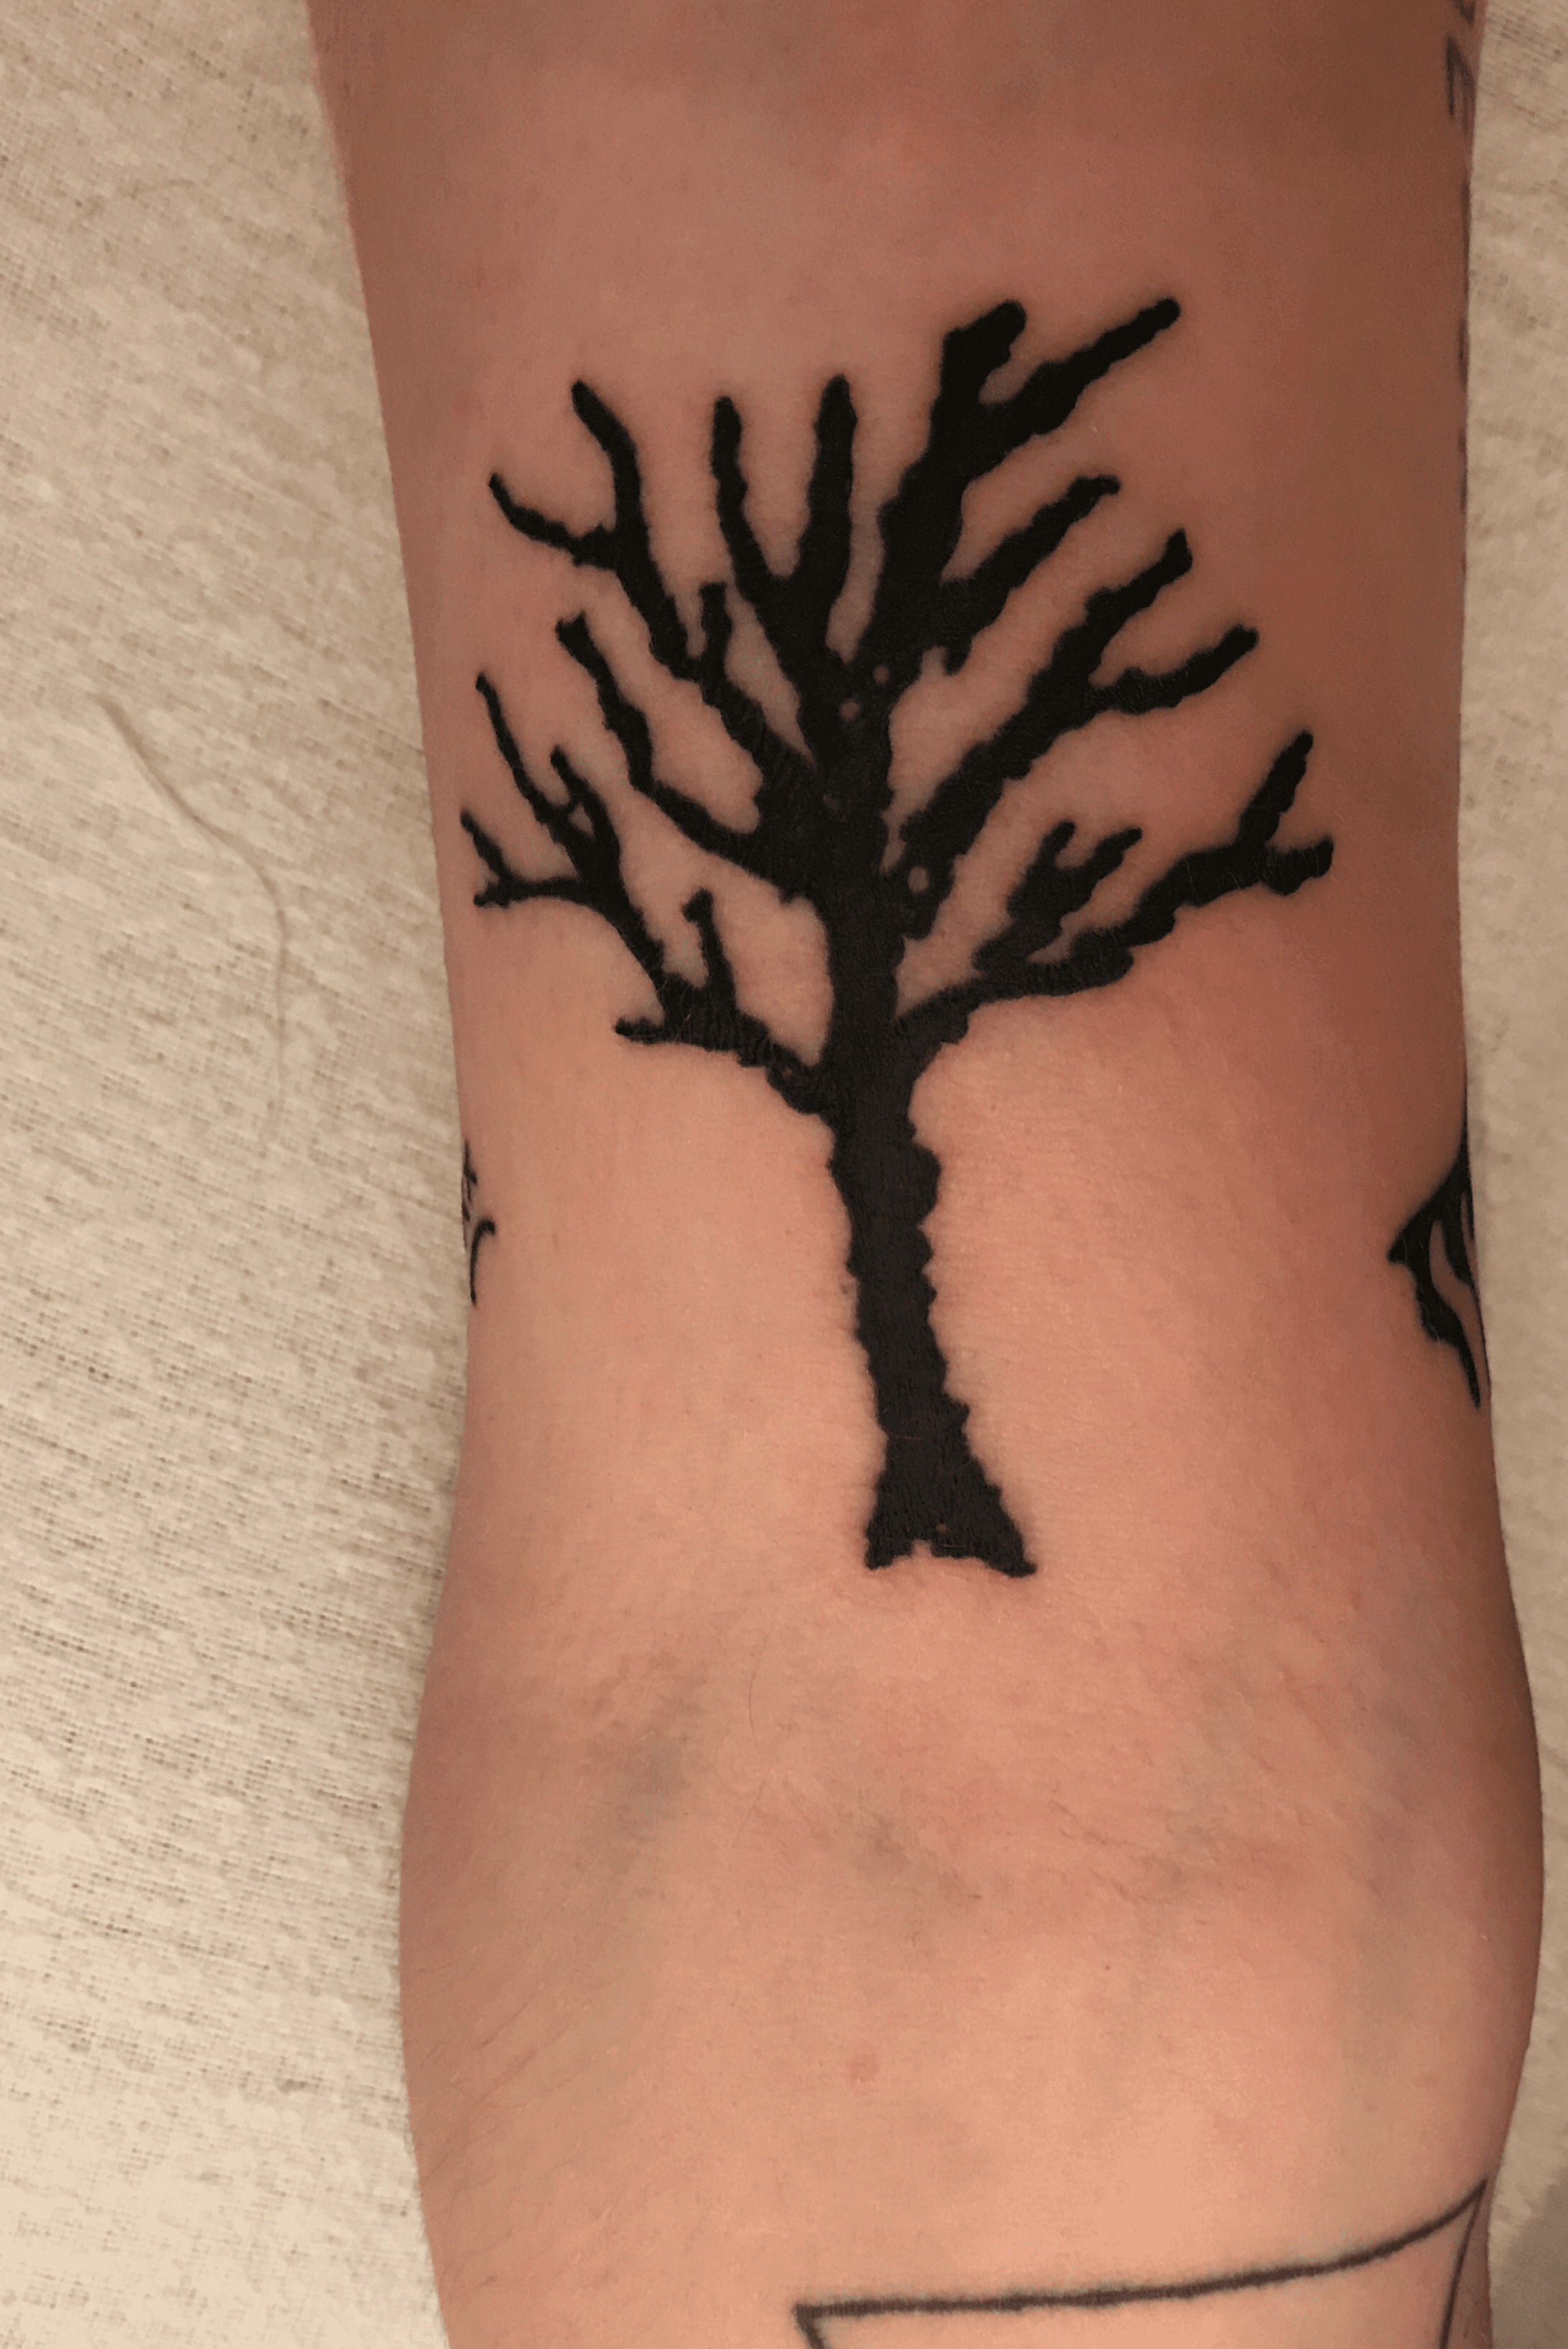 XXXTENTACION LEAFLESS TREE TATTOO Mounted Print for Sale by KRNTH   Redbubble